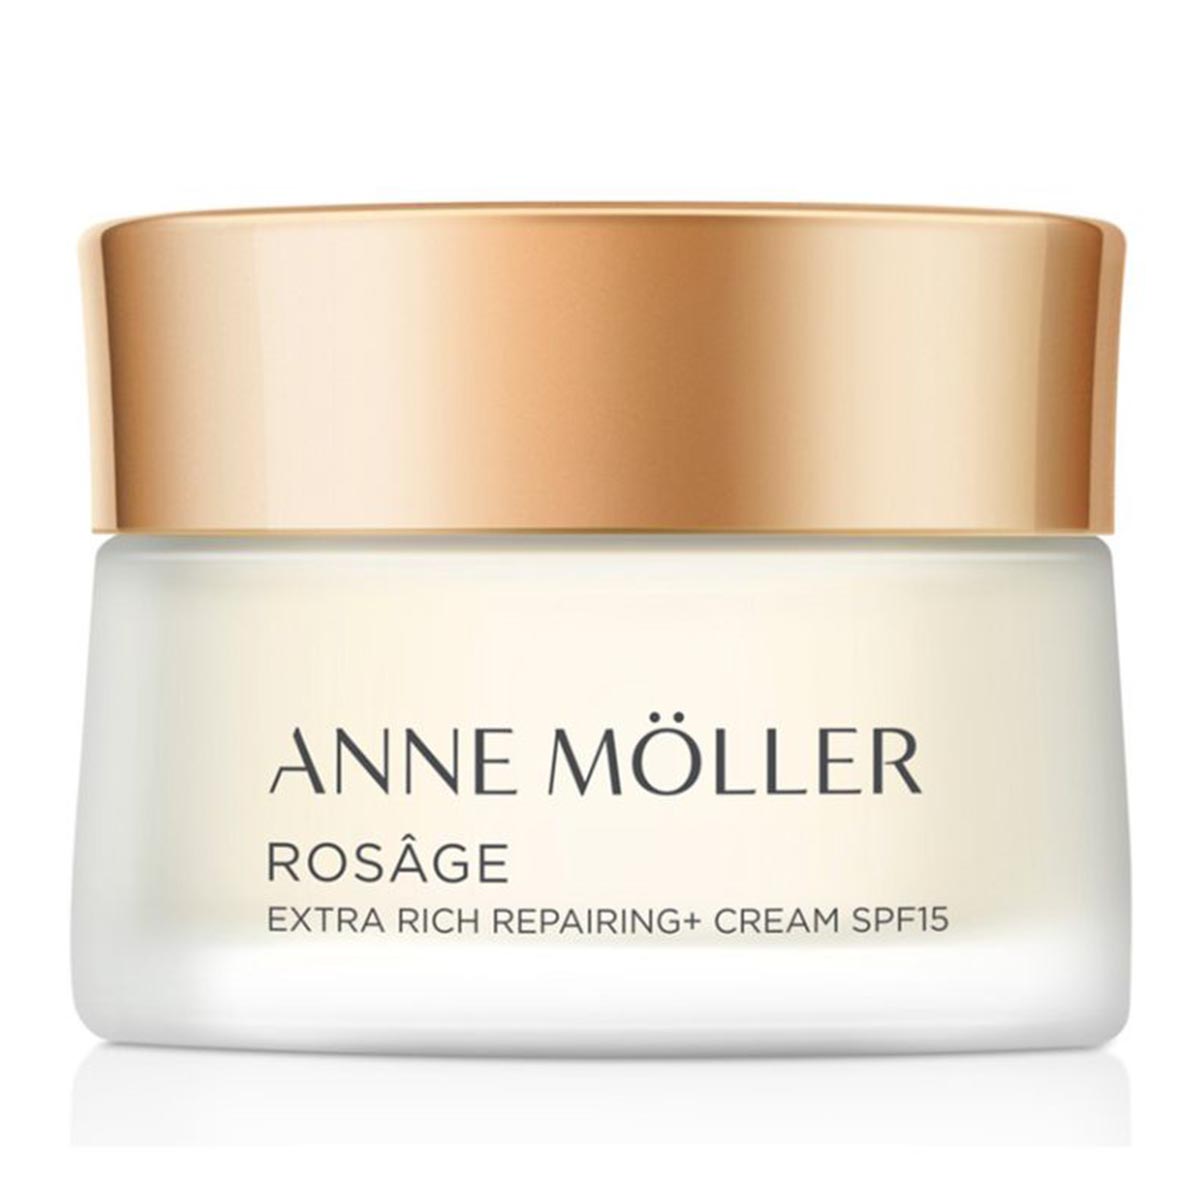 Image of Anne Moller Rosage Spf15 Extra Rich Repairing Cream 50ml